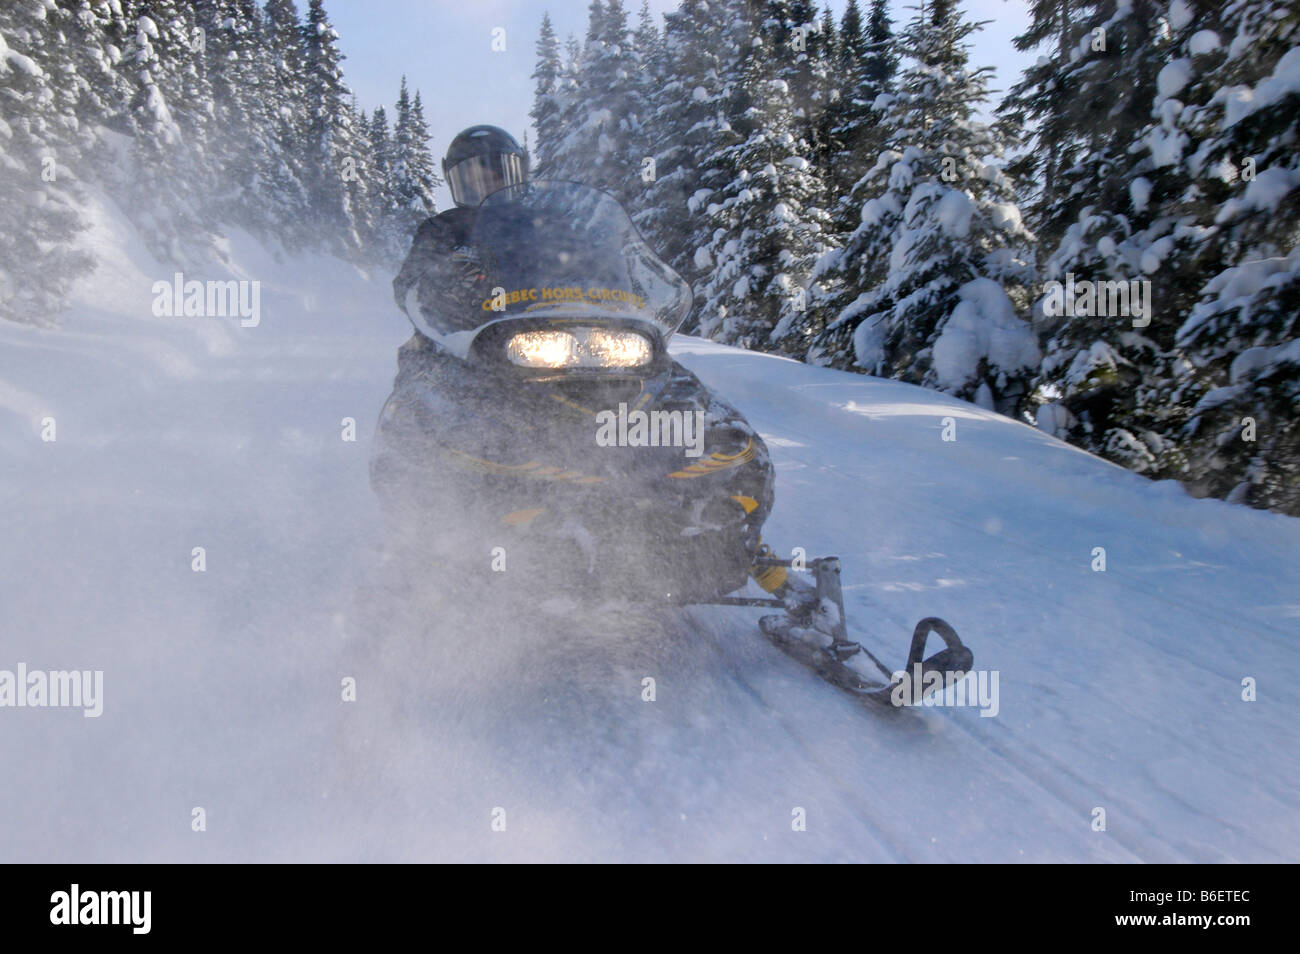 Snow mobile, snow mobile in the snow, Saguenay Lac Saint Jean Region, Mont Valin, Quebec, Canada, North America Stock Photo